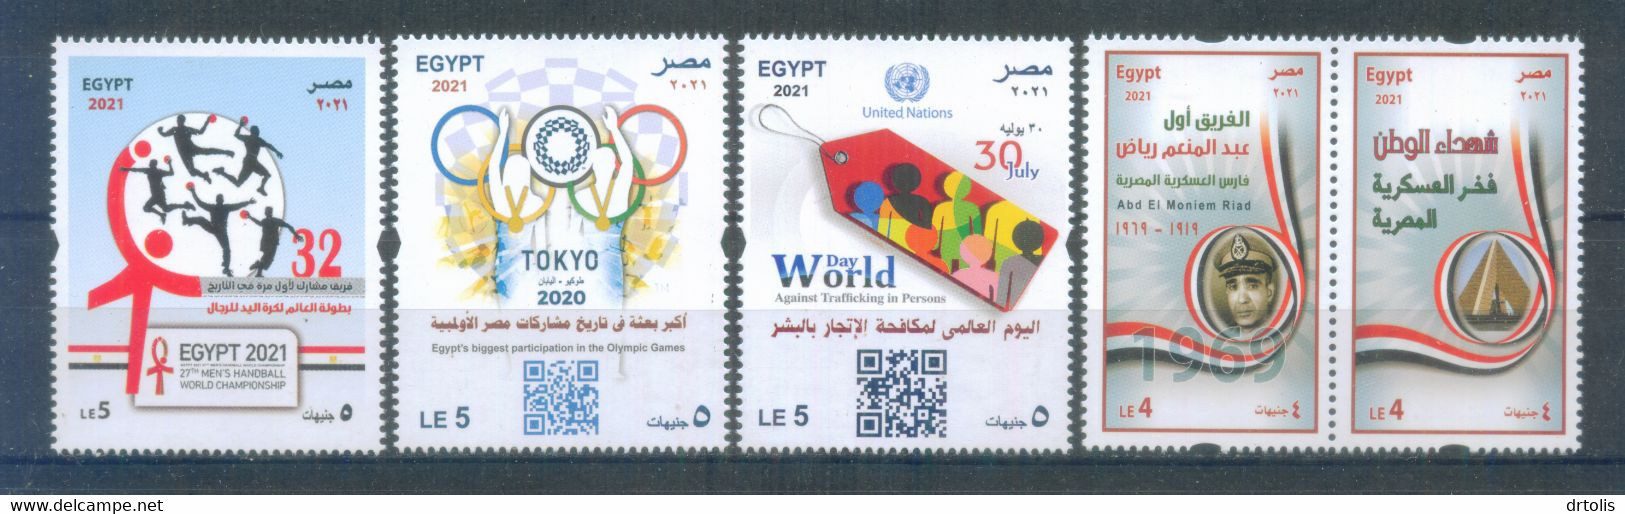 EGYPT / 2021 / ALL ISSUES TO CURRENT / MNH / VF/ 9 SCANS